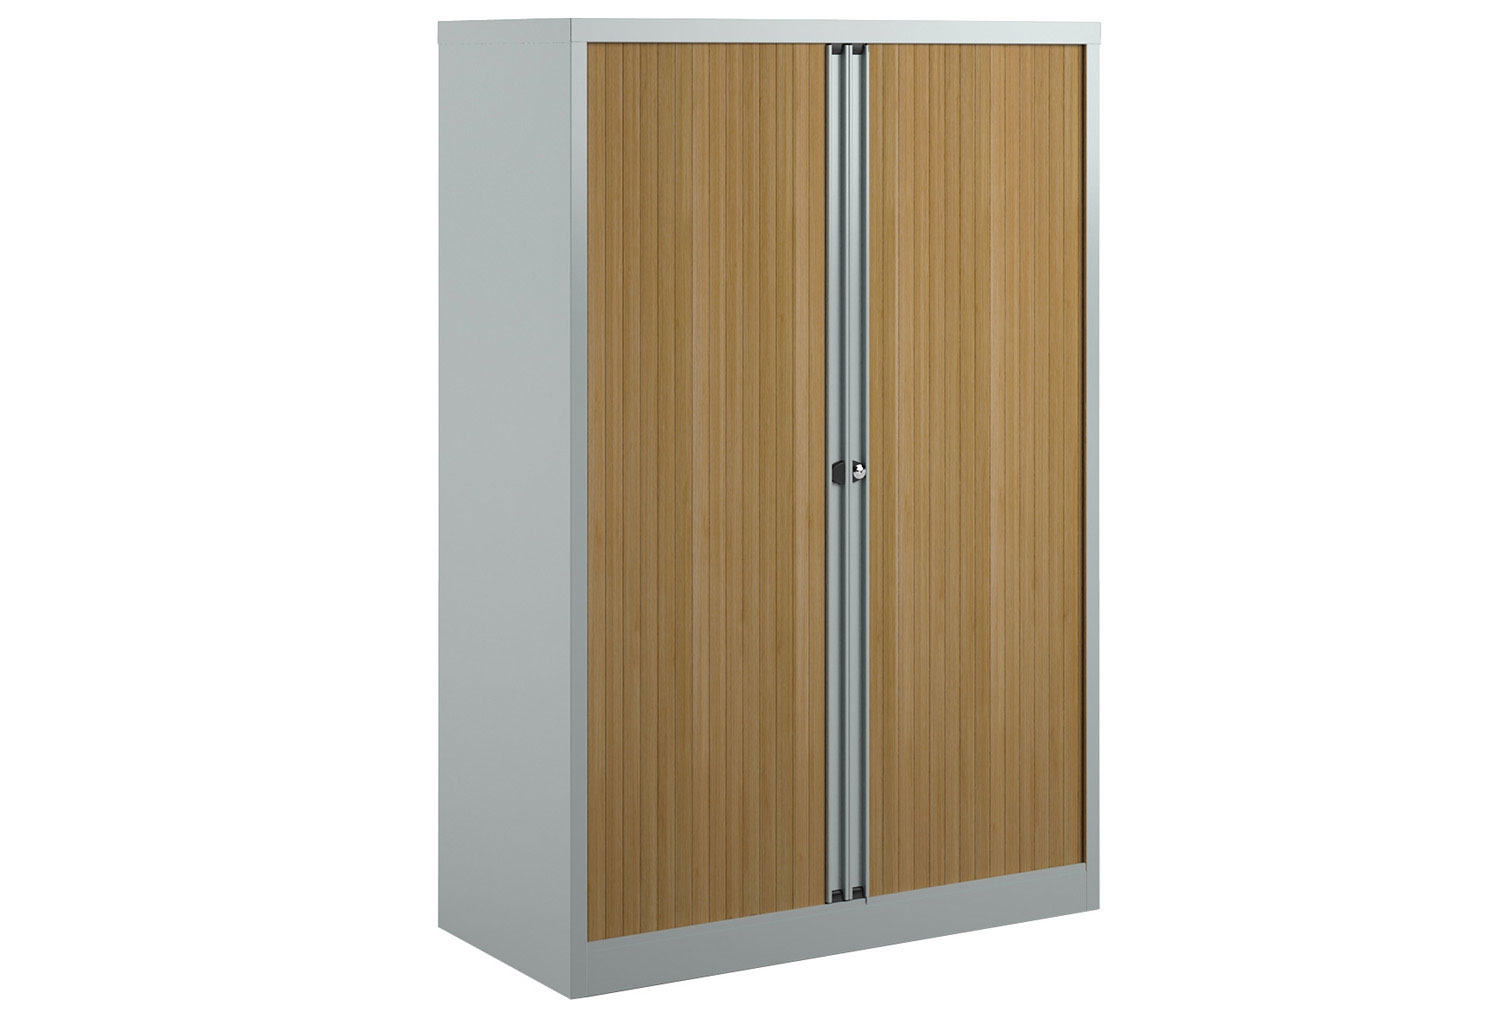 Bisley Economy Tambour Office Cupboards, 100wx47dx159h (cm), Silver / Beech, Express Delivery